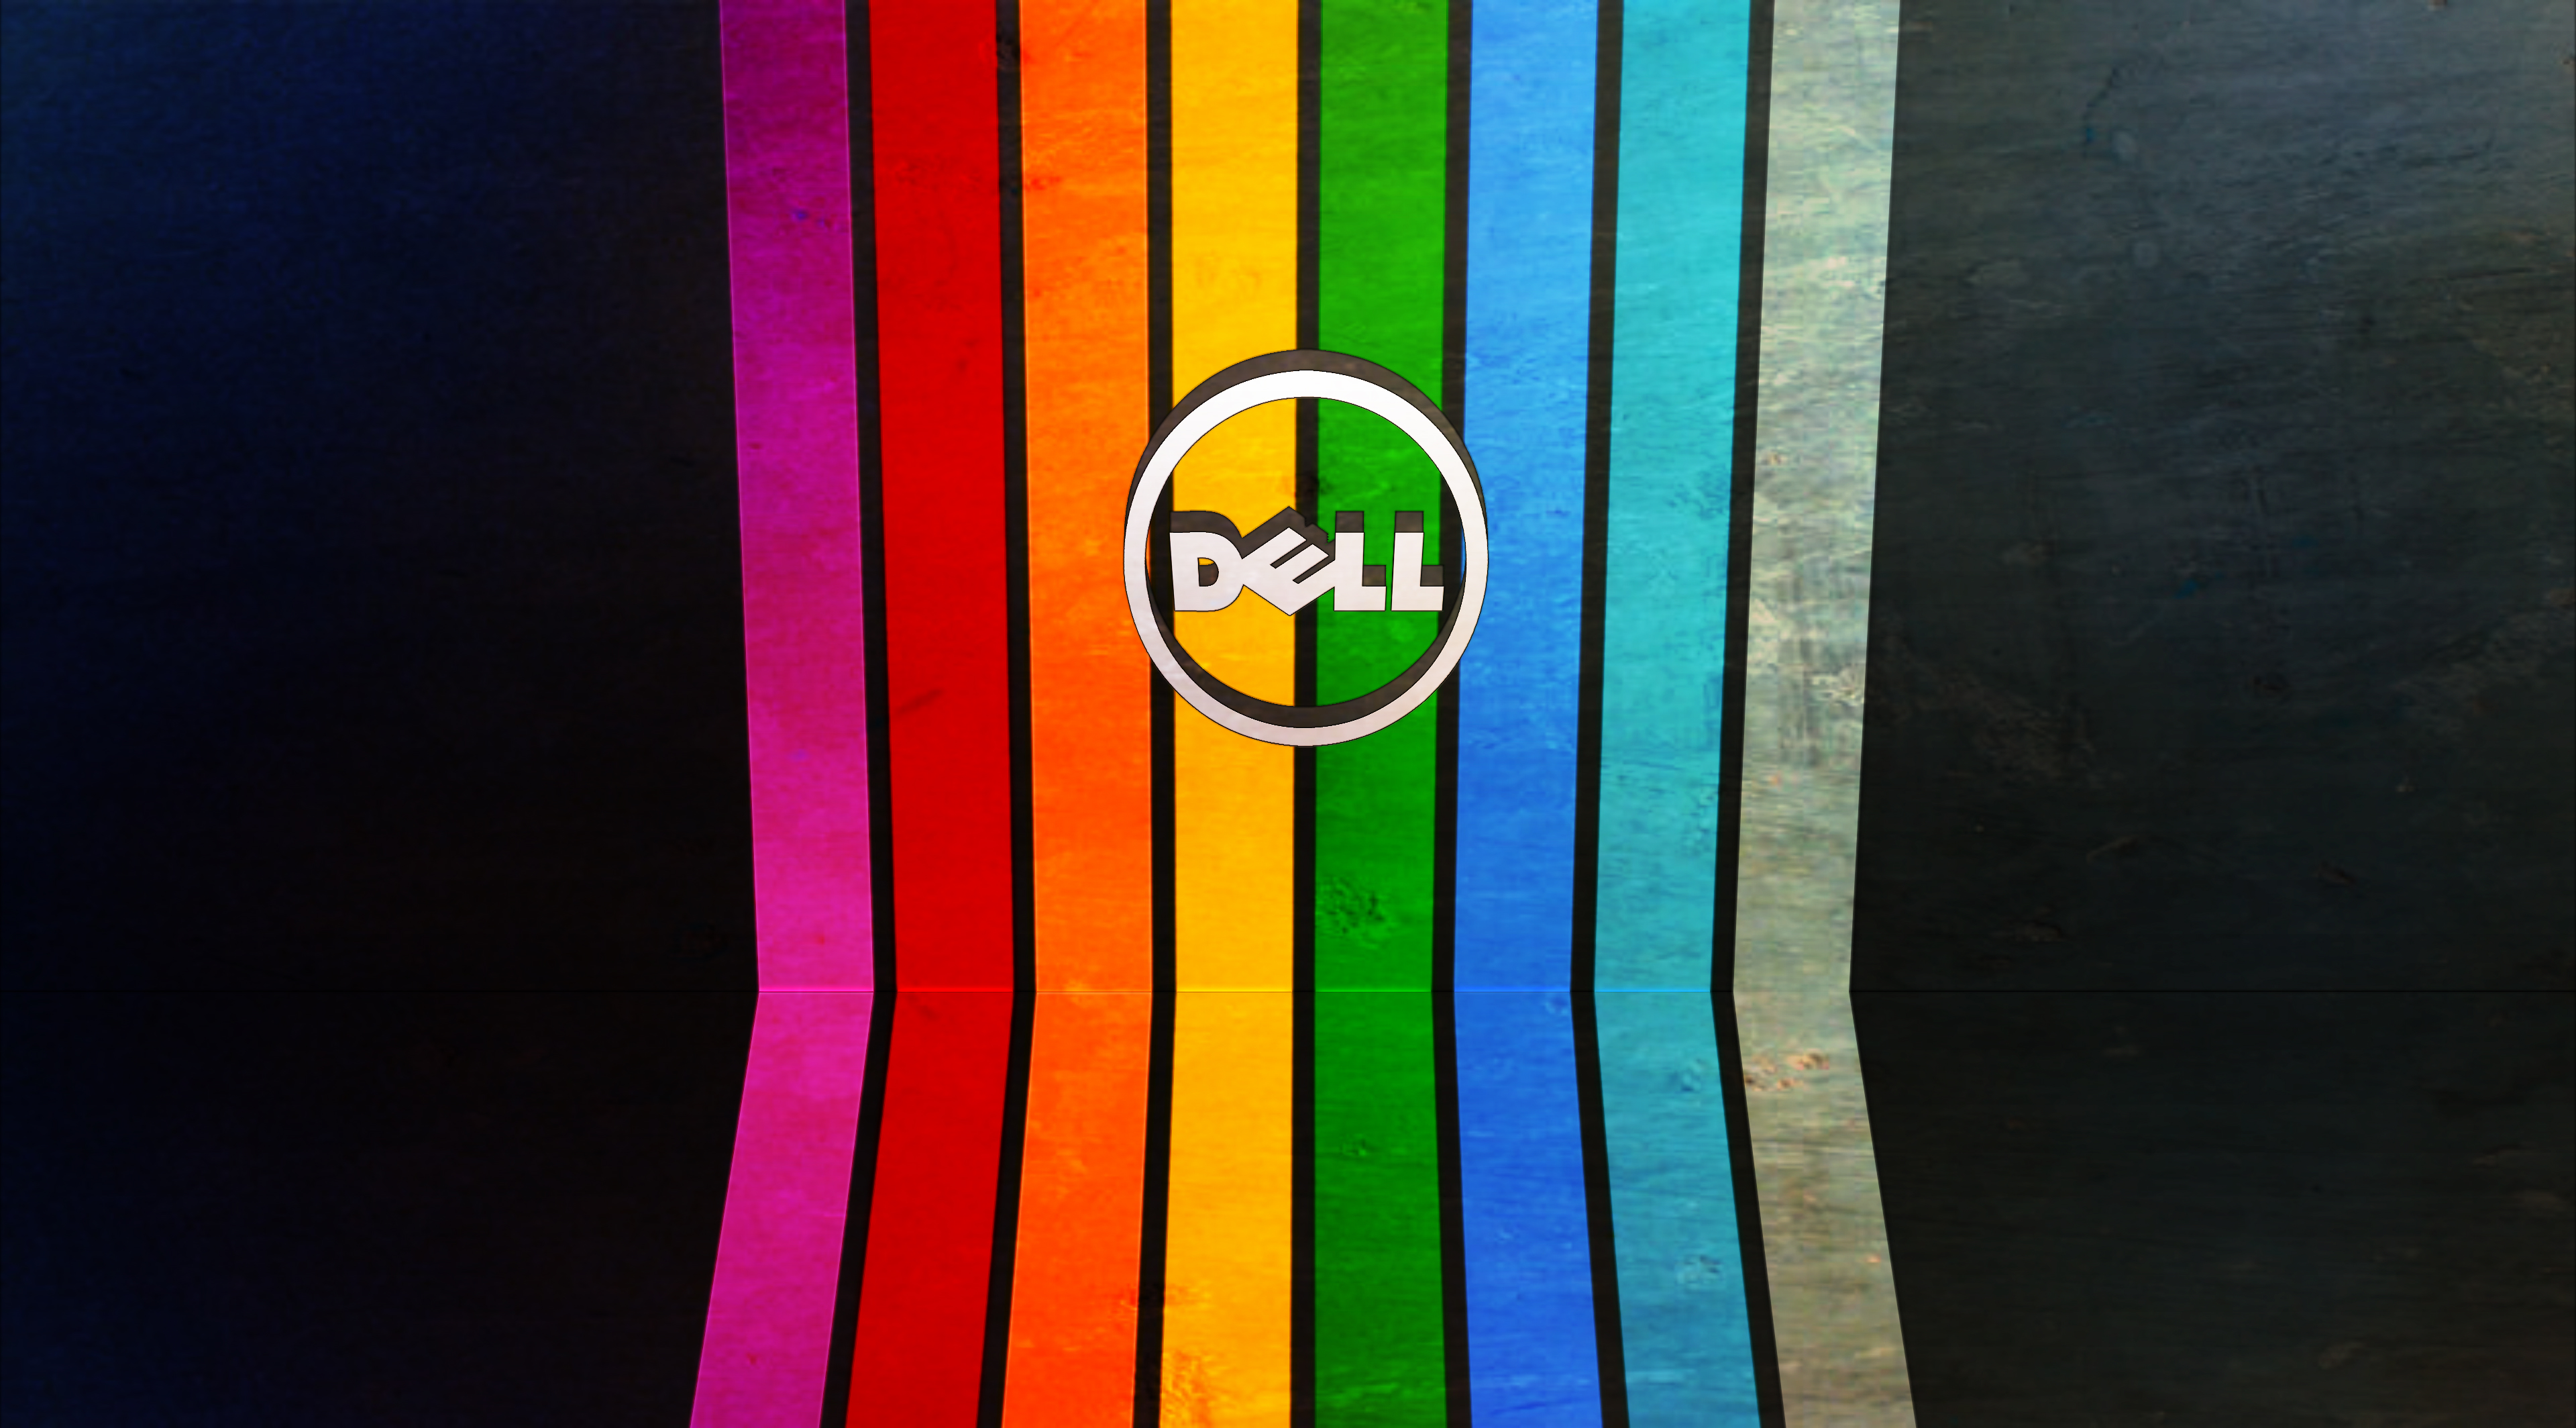 technology, dell